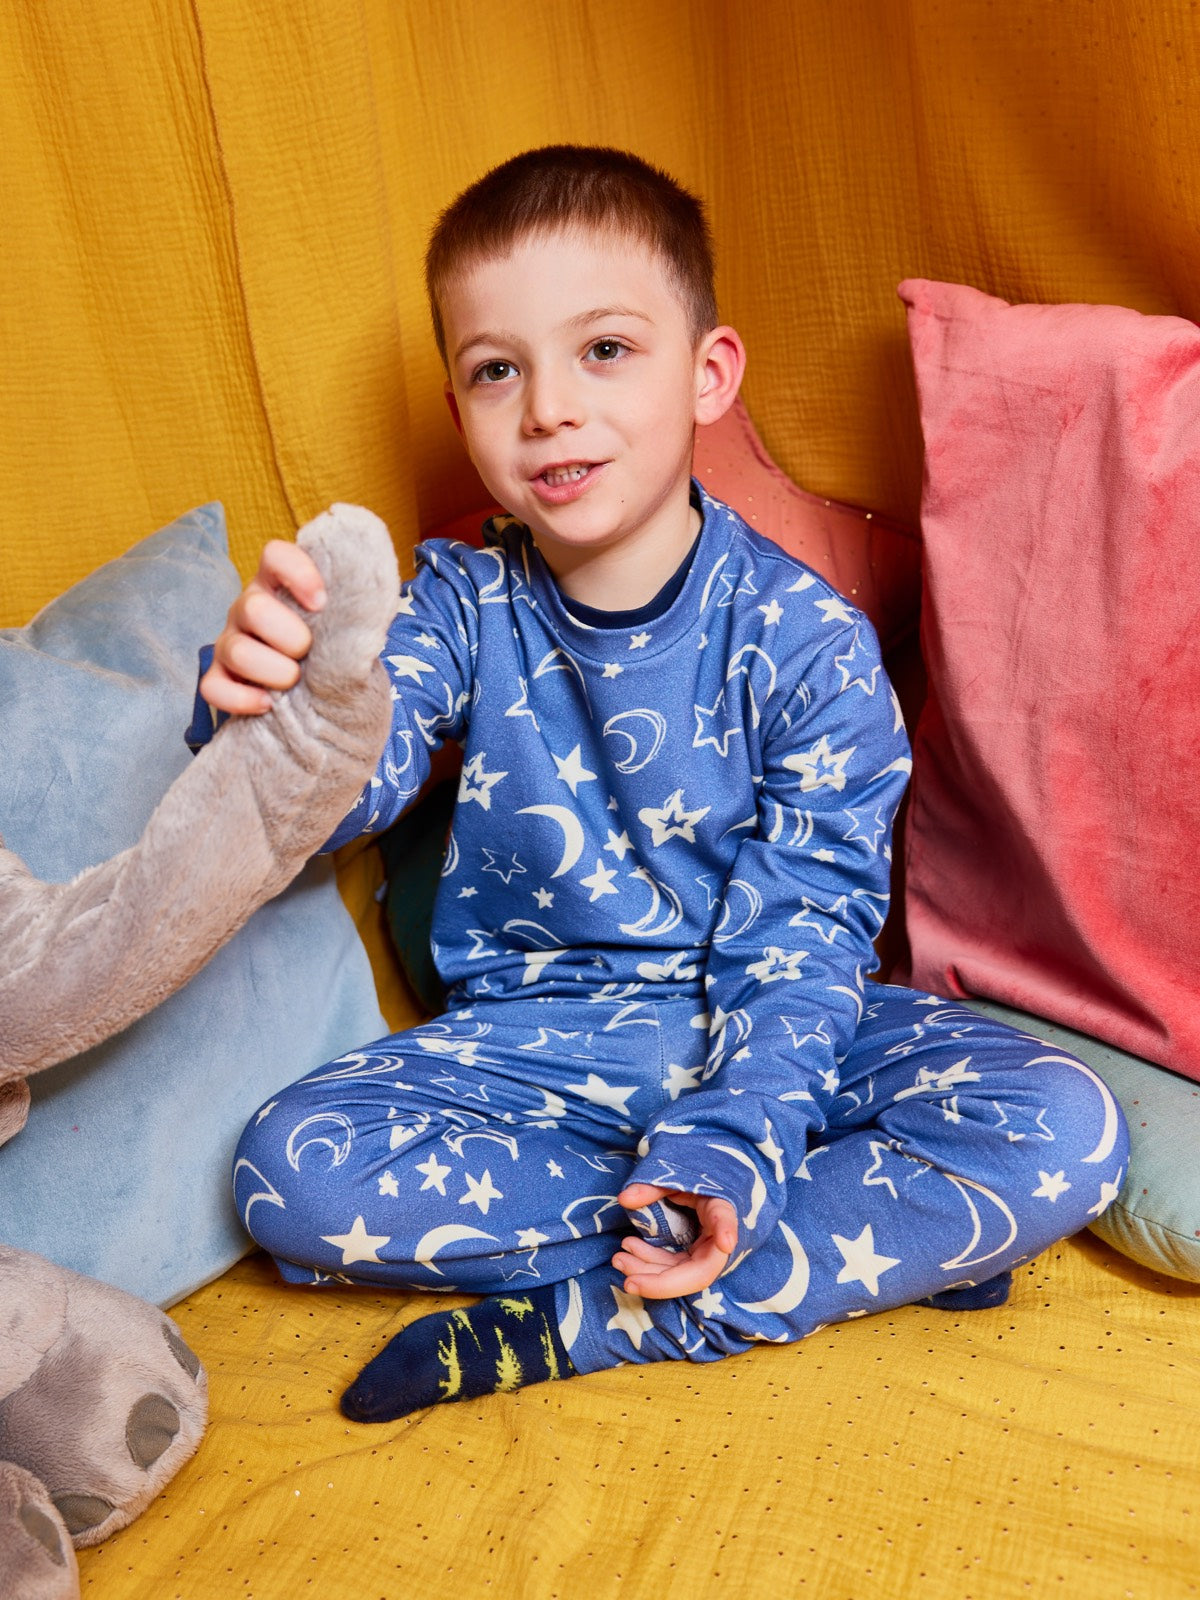 A child wearing the Mira sustainable kids PJ set in blue with a white moon and star print, pictured sitting cross-legged on the floor with bright cushions and holding on to a cuddly toy.